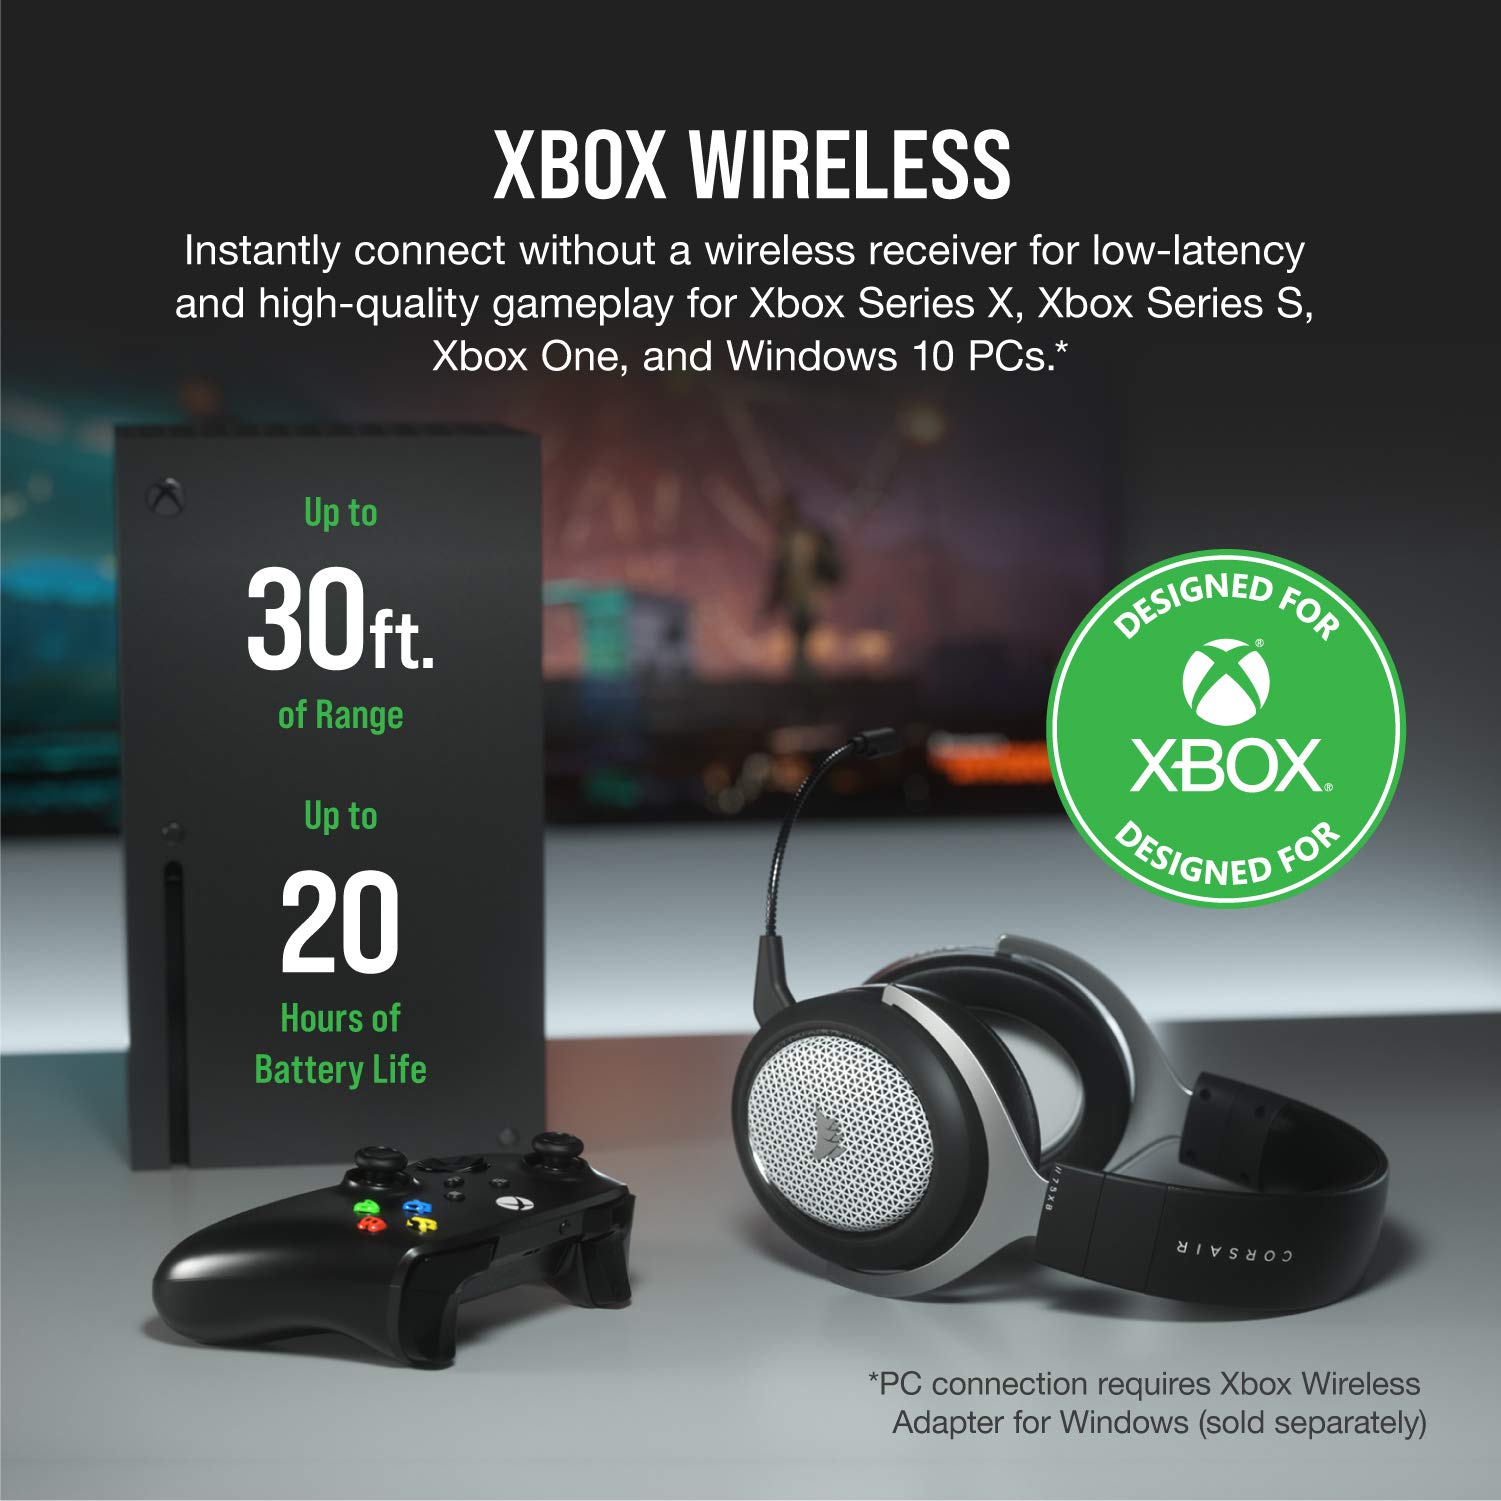 Corsair headset connected to an Xbox One controller